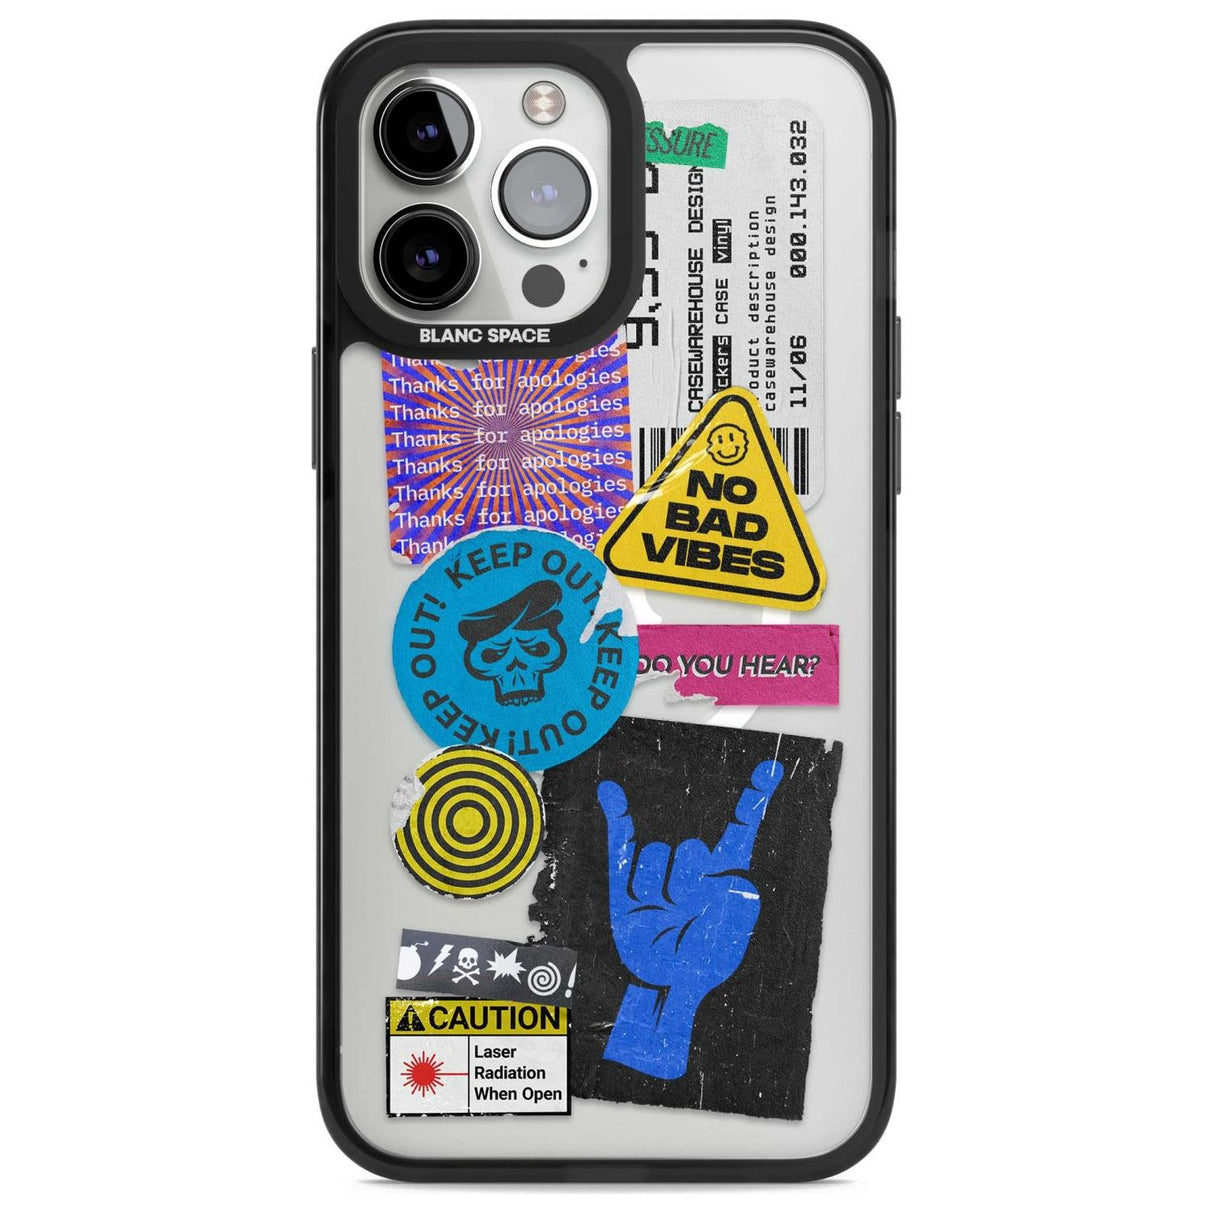 No Bad Vibes Sticker Mix Phone Case iPhone 13 Pro Max / Magsafe Black Impact Case Blanc Space